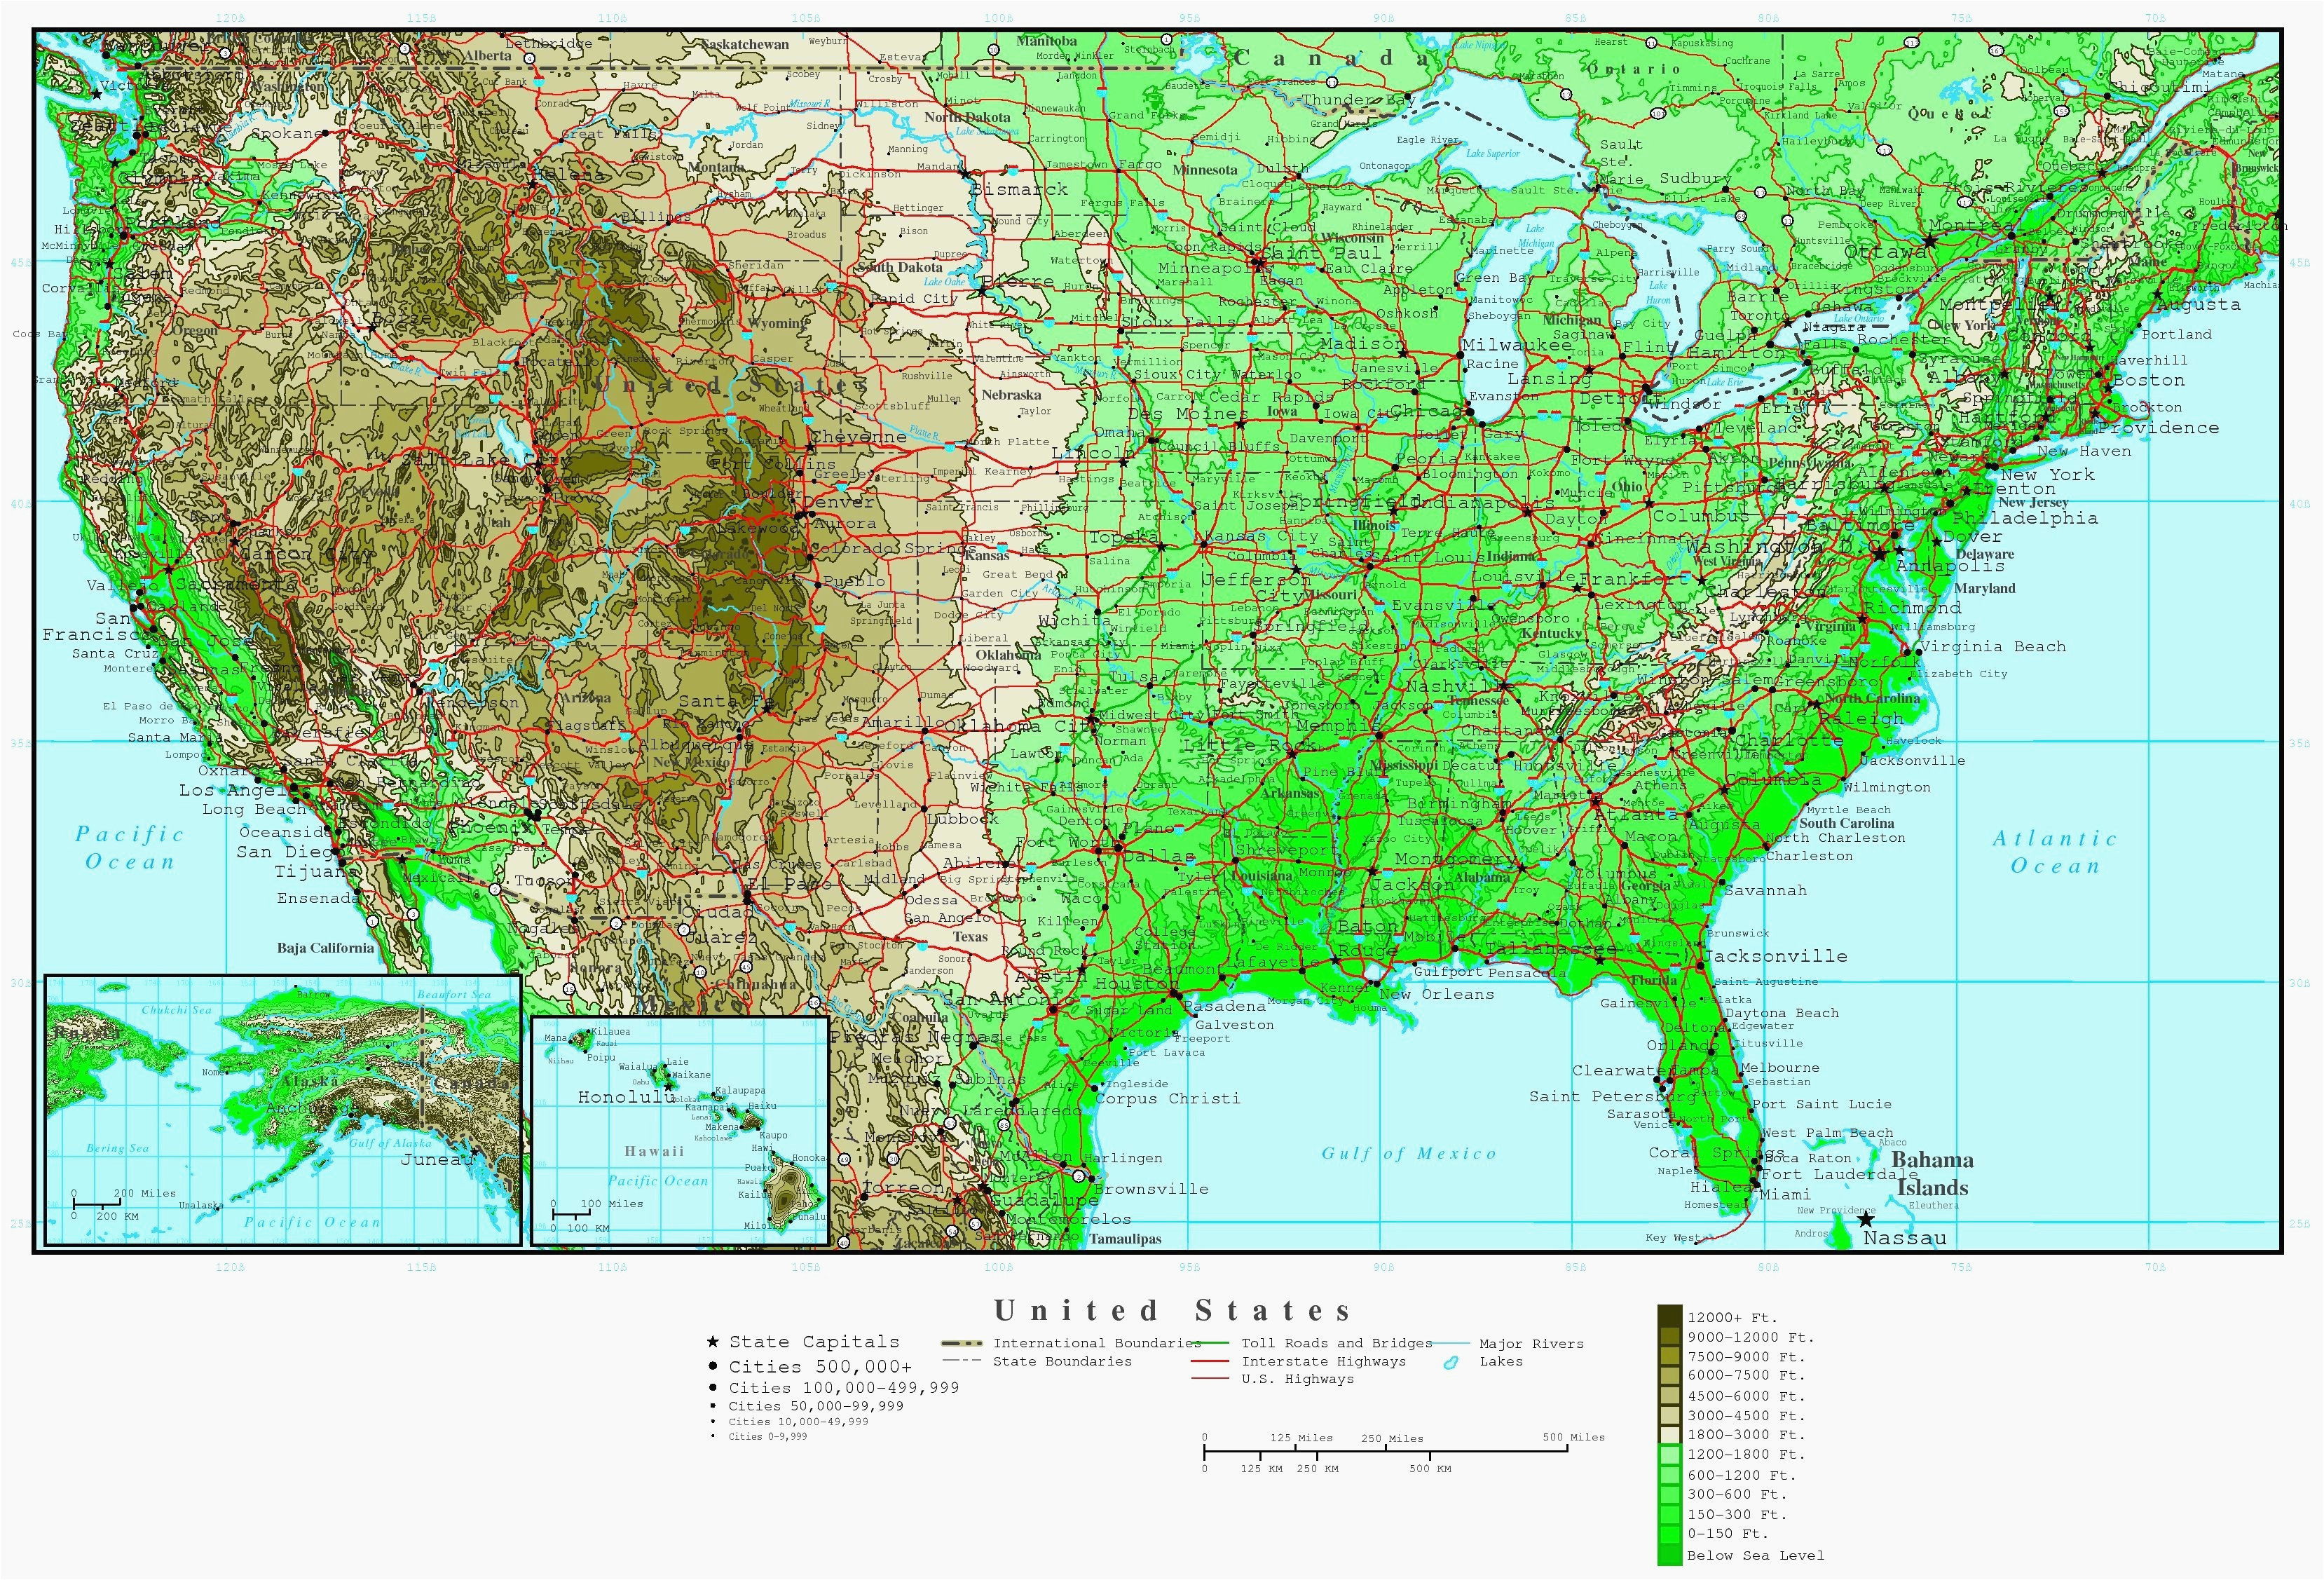 Topographic Map Of England topographical Map Colorado Us Elevation Road Map Fresh Us